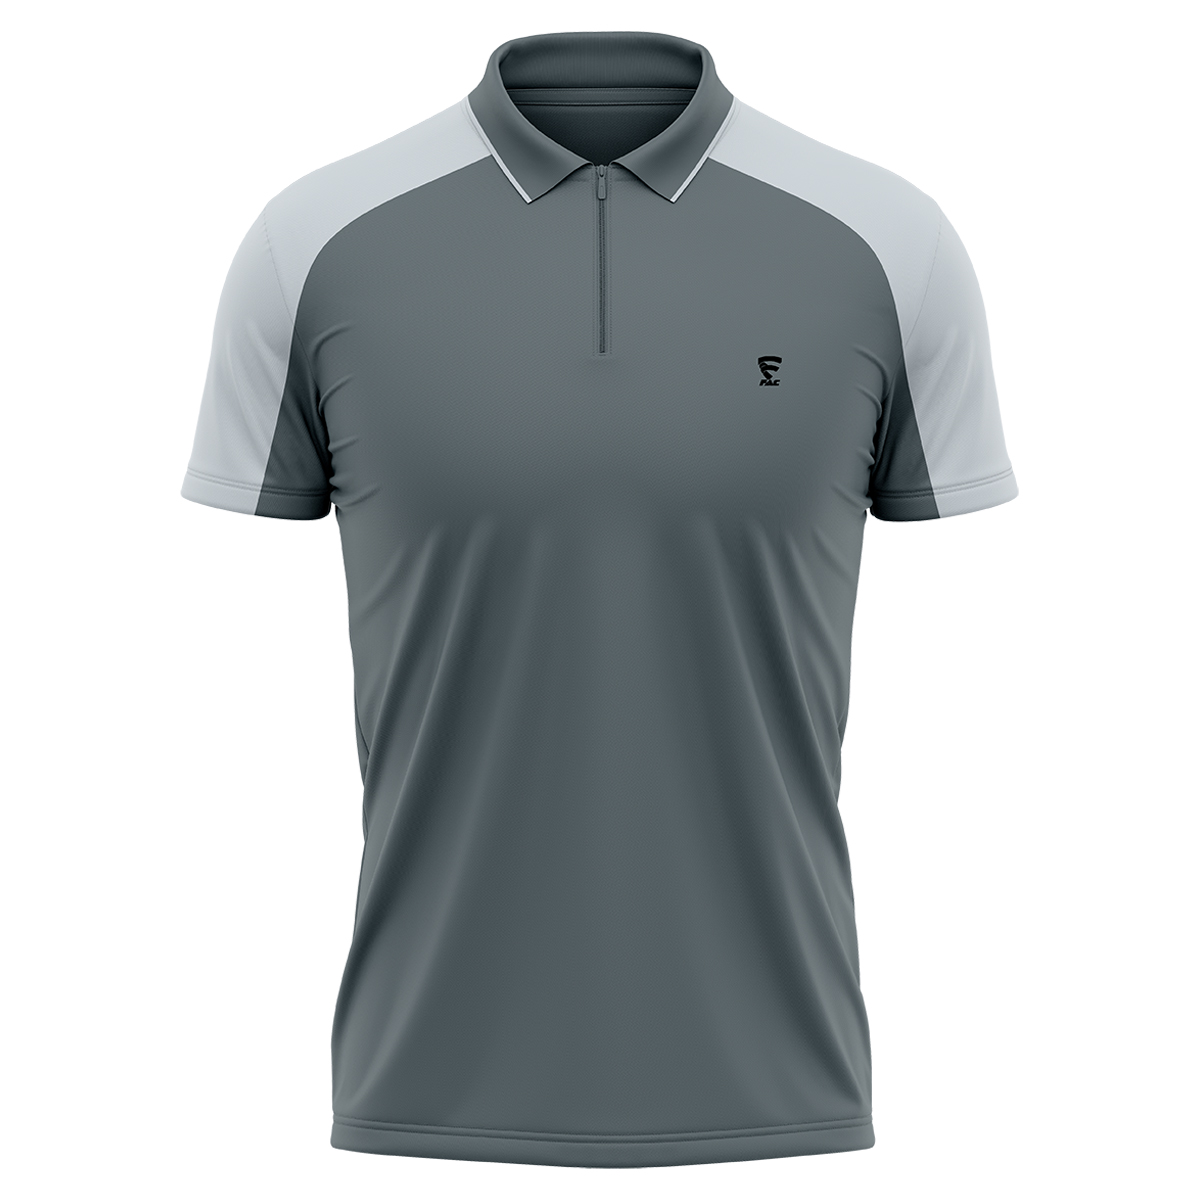 Table Tennis Polo Shirt’s – First American Corporation (Pvt) Ltd